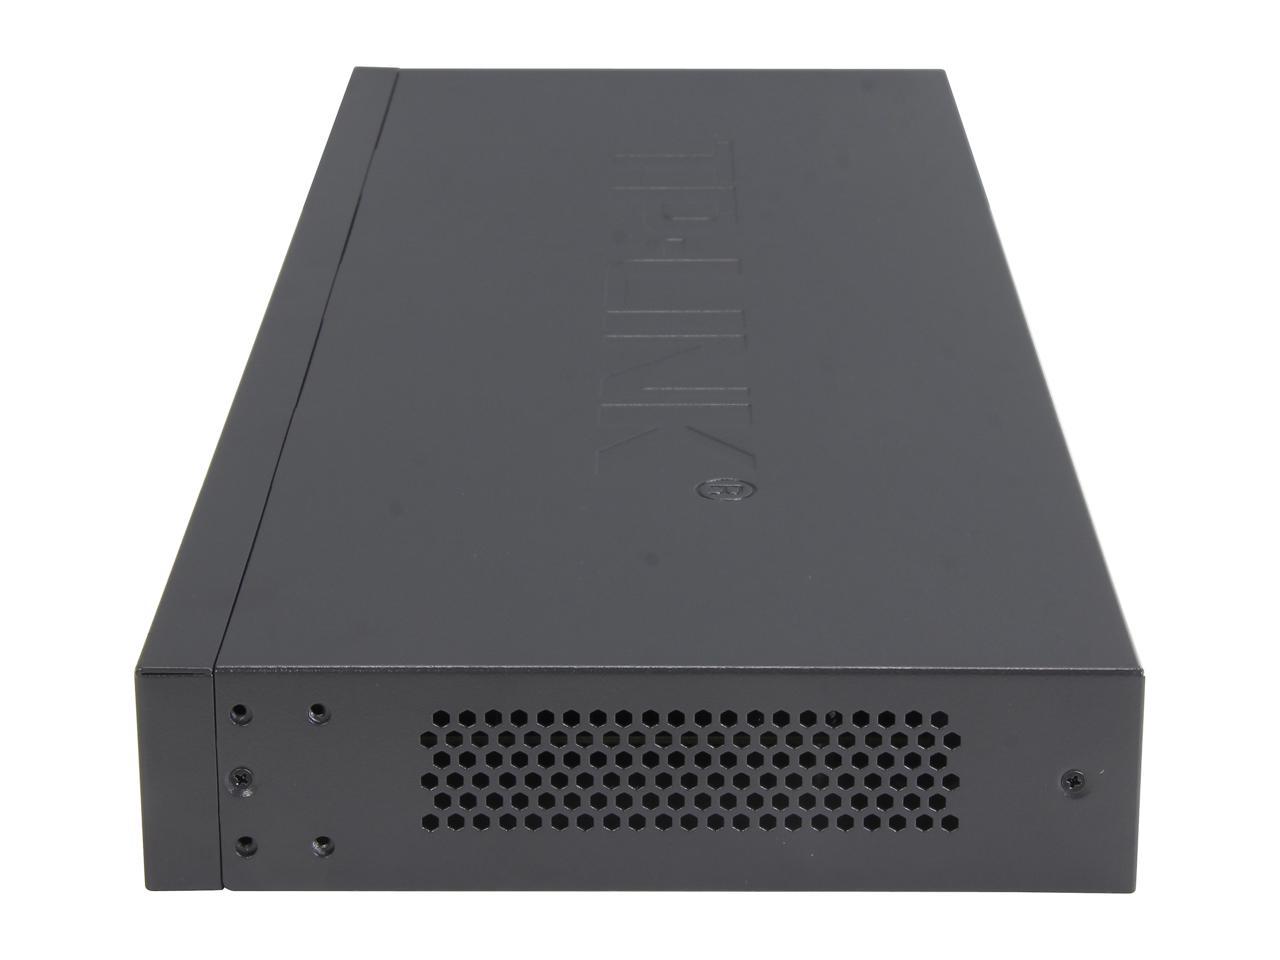 TP-Link 24 Port Gigabit Ethernet Switch | Plug and Play | Sturdy Metal w/Shielded Ports | Rackmount | Fanless | Limited Lifetime Protection | Unmanaged (TL-SG1024) - image 3 of 5